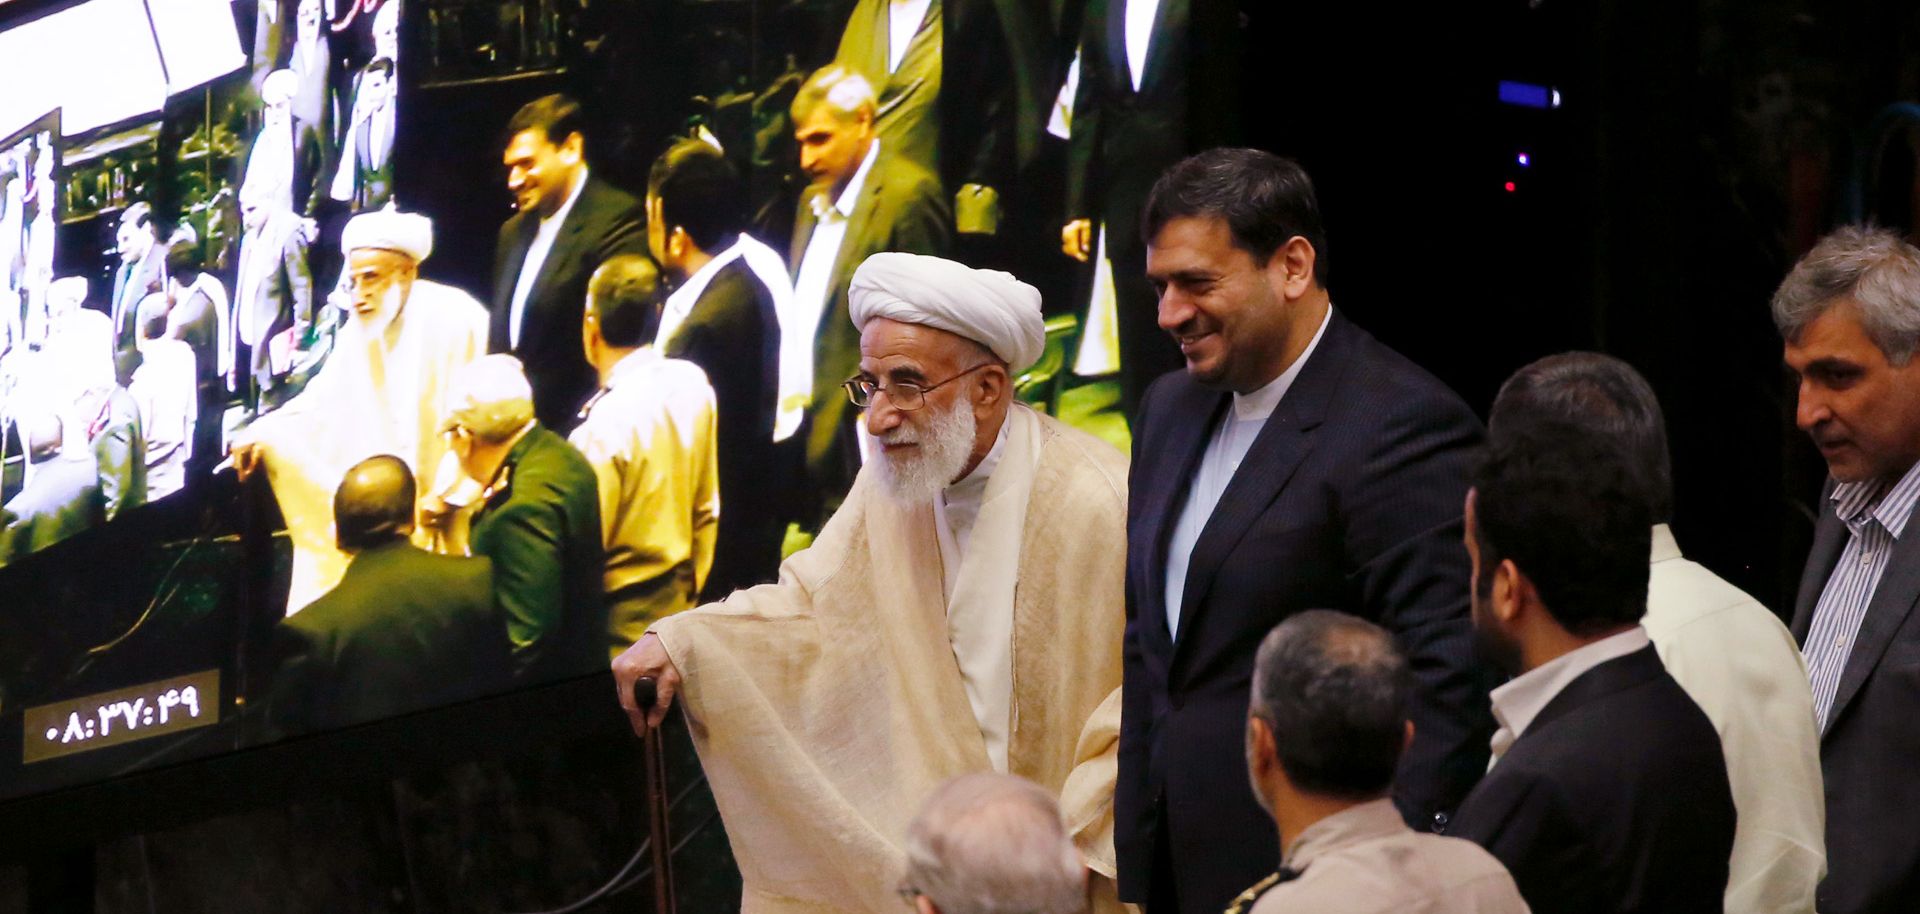 The head of Iran's Assembly of Experts walks past a TV screen at the opening session of the Majlis in Tehran. The assembly is preparing to weigh in on who should compete for the country's highest elected office.